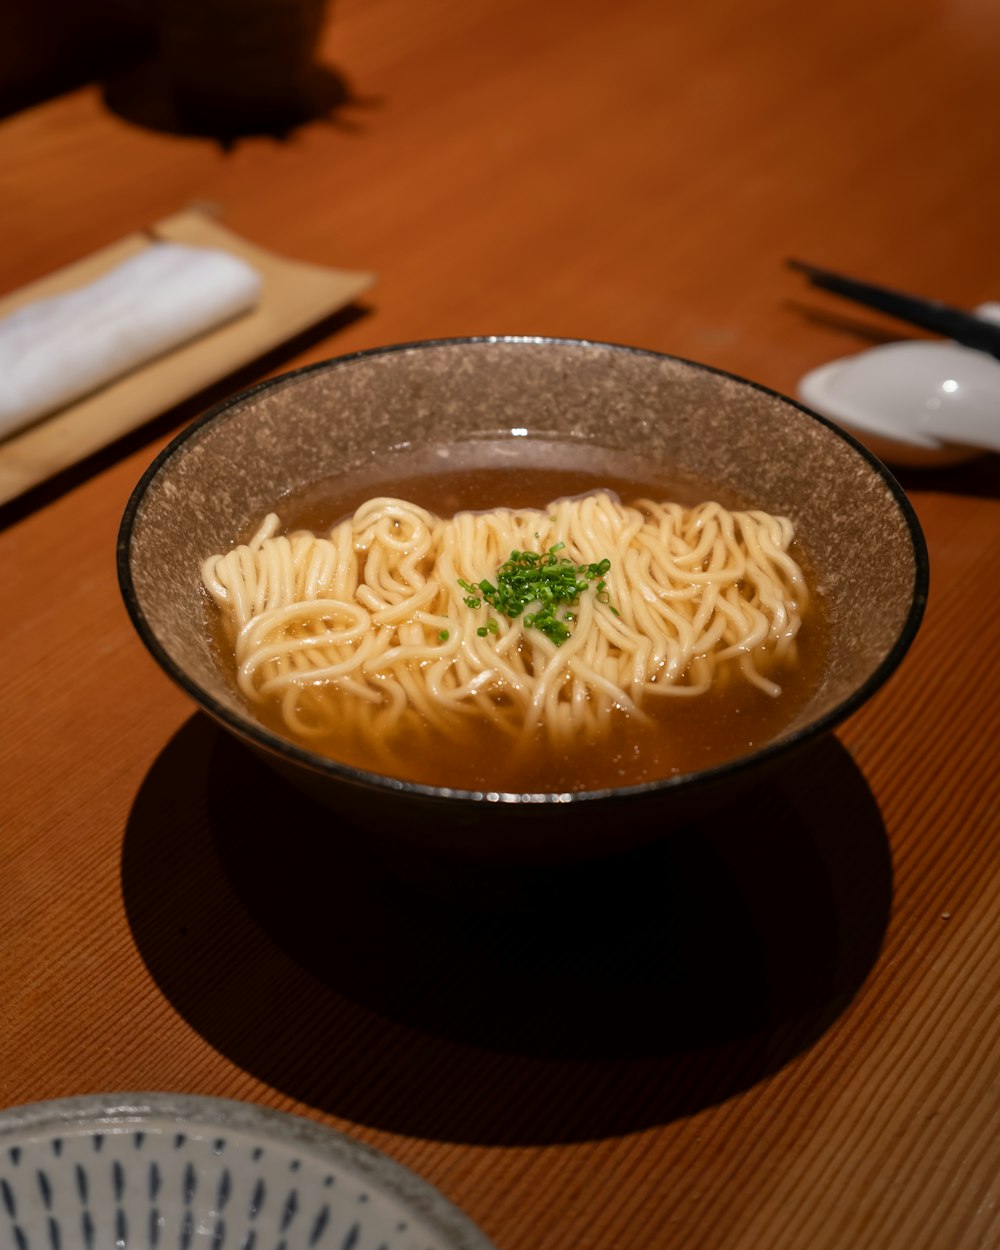 a bowl of noodles with a garnish on top of it